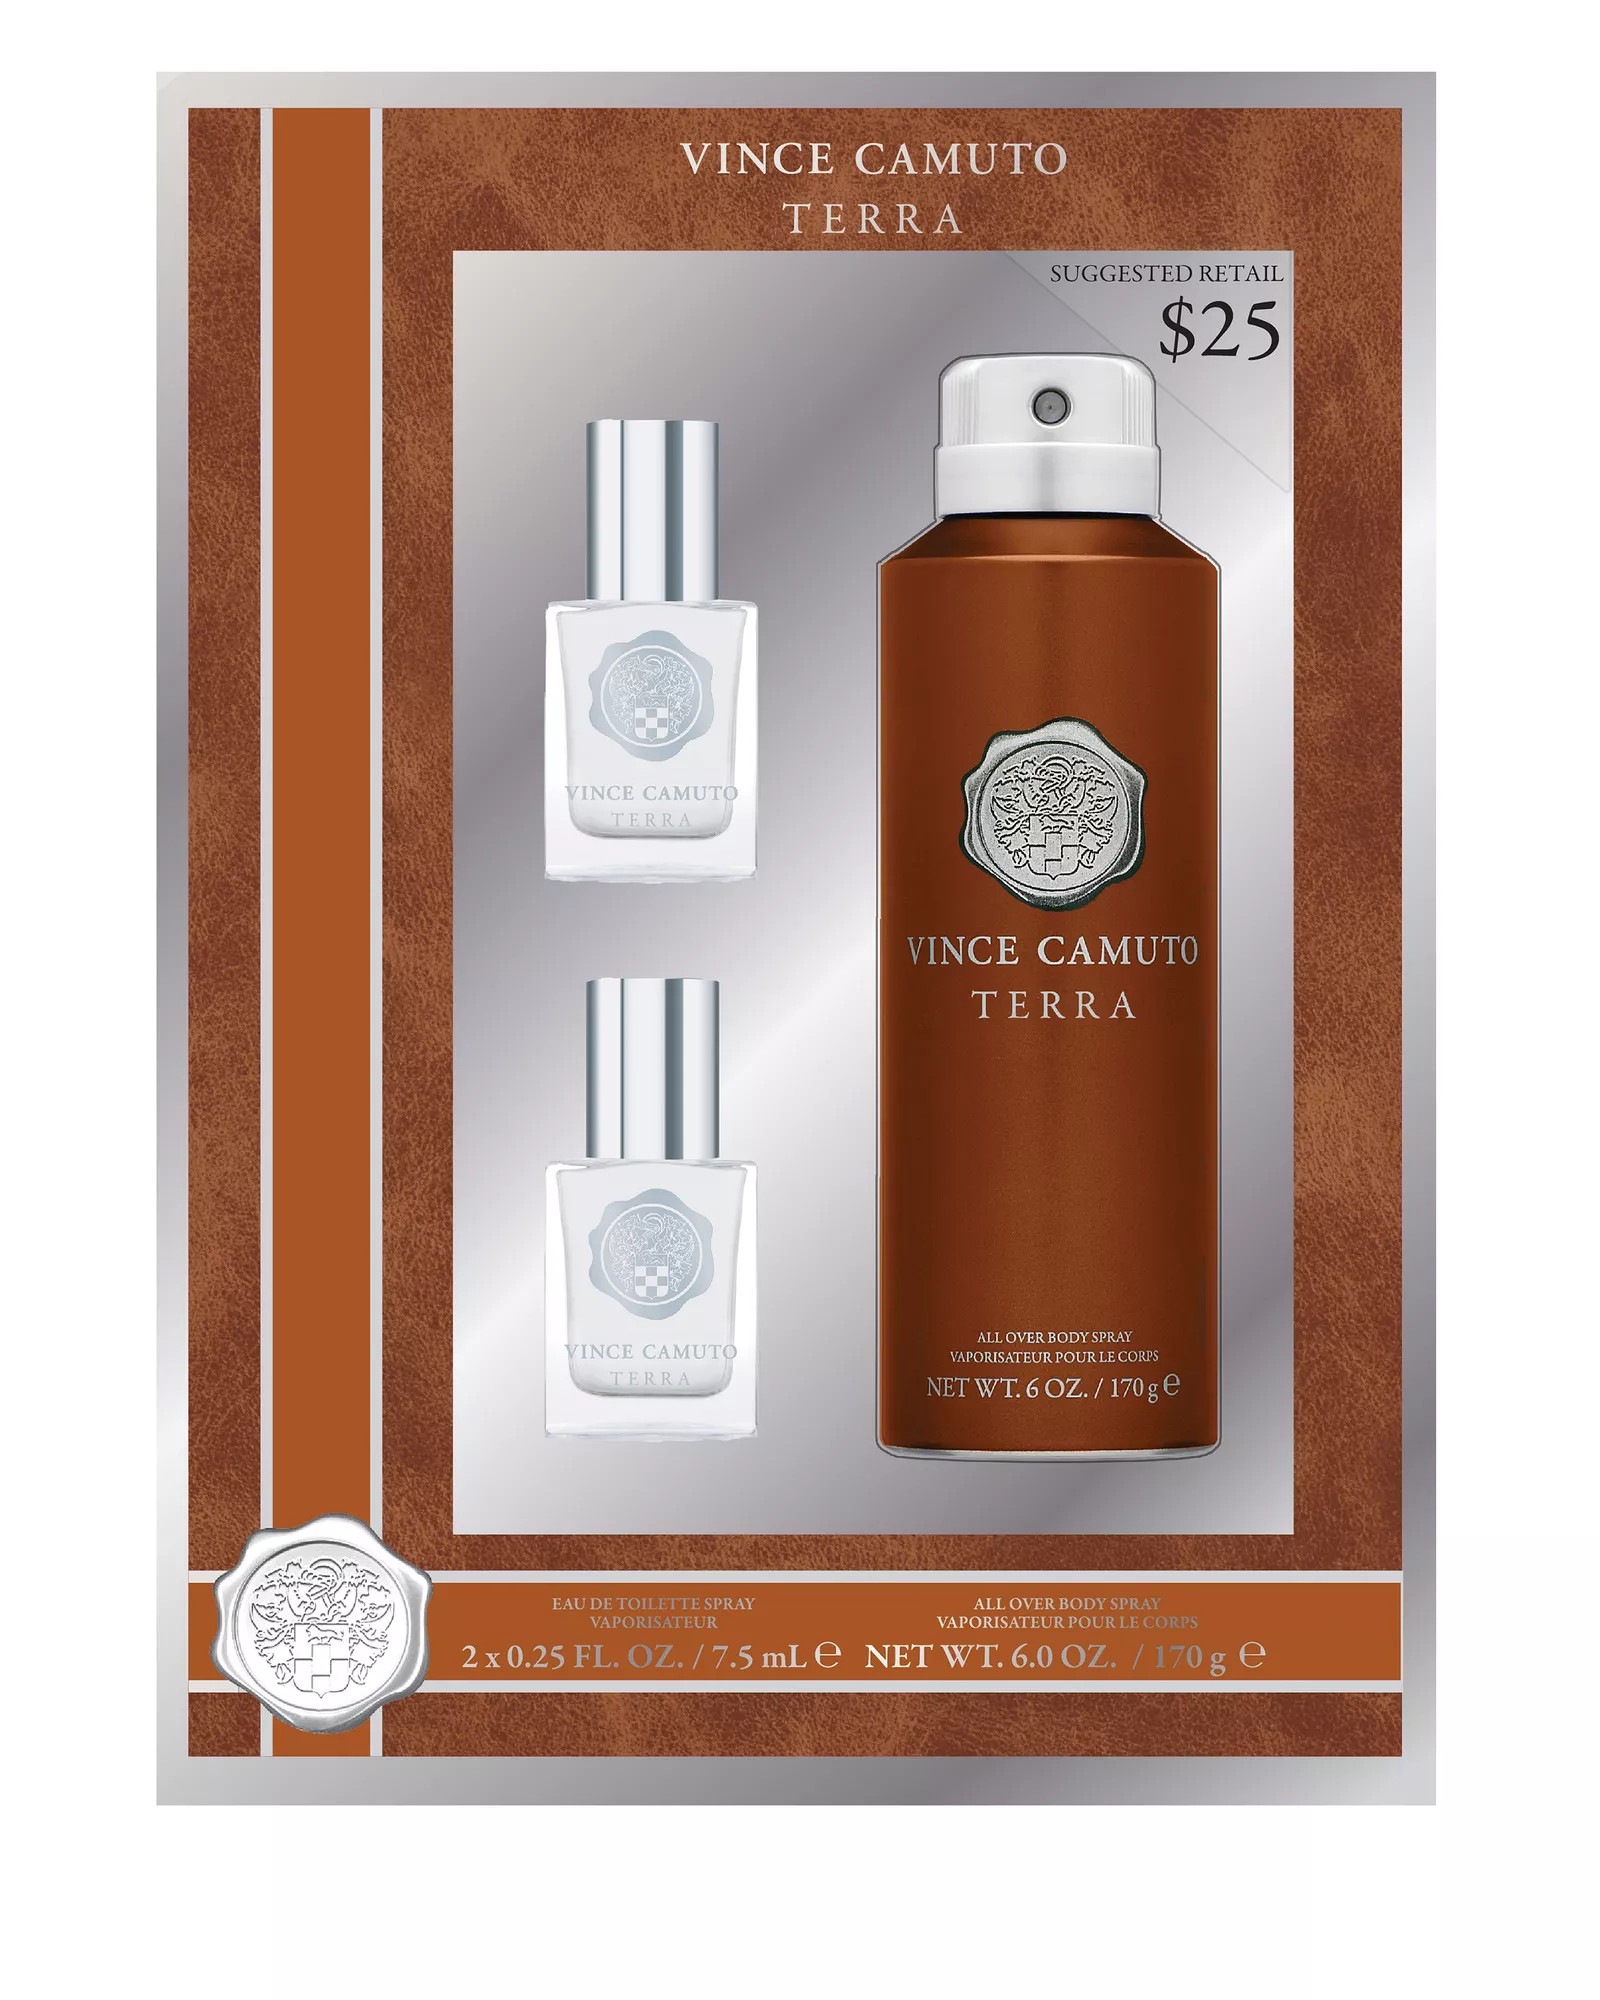 SCENTBOX LOVE IT OR LEAVE IT (VINCE CAMUTO VIRTU BY: Vince Camuto